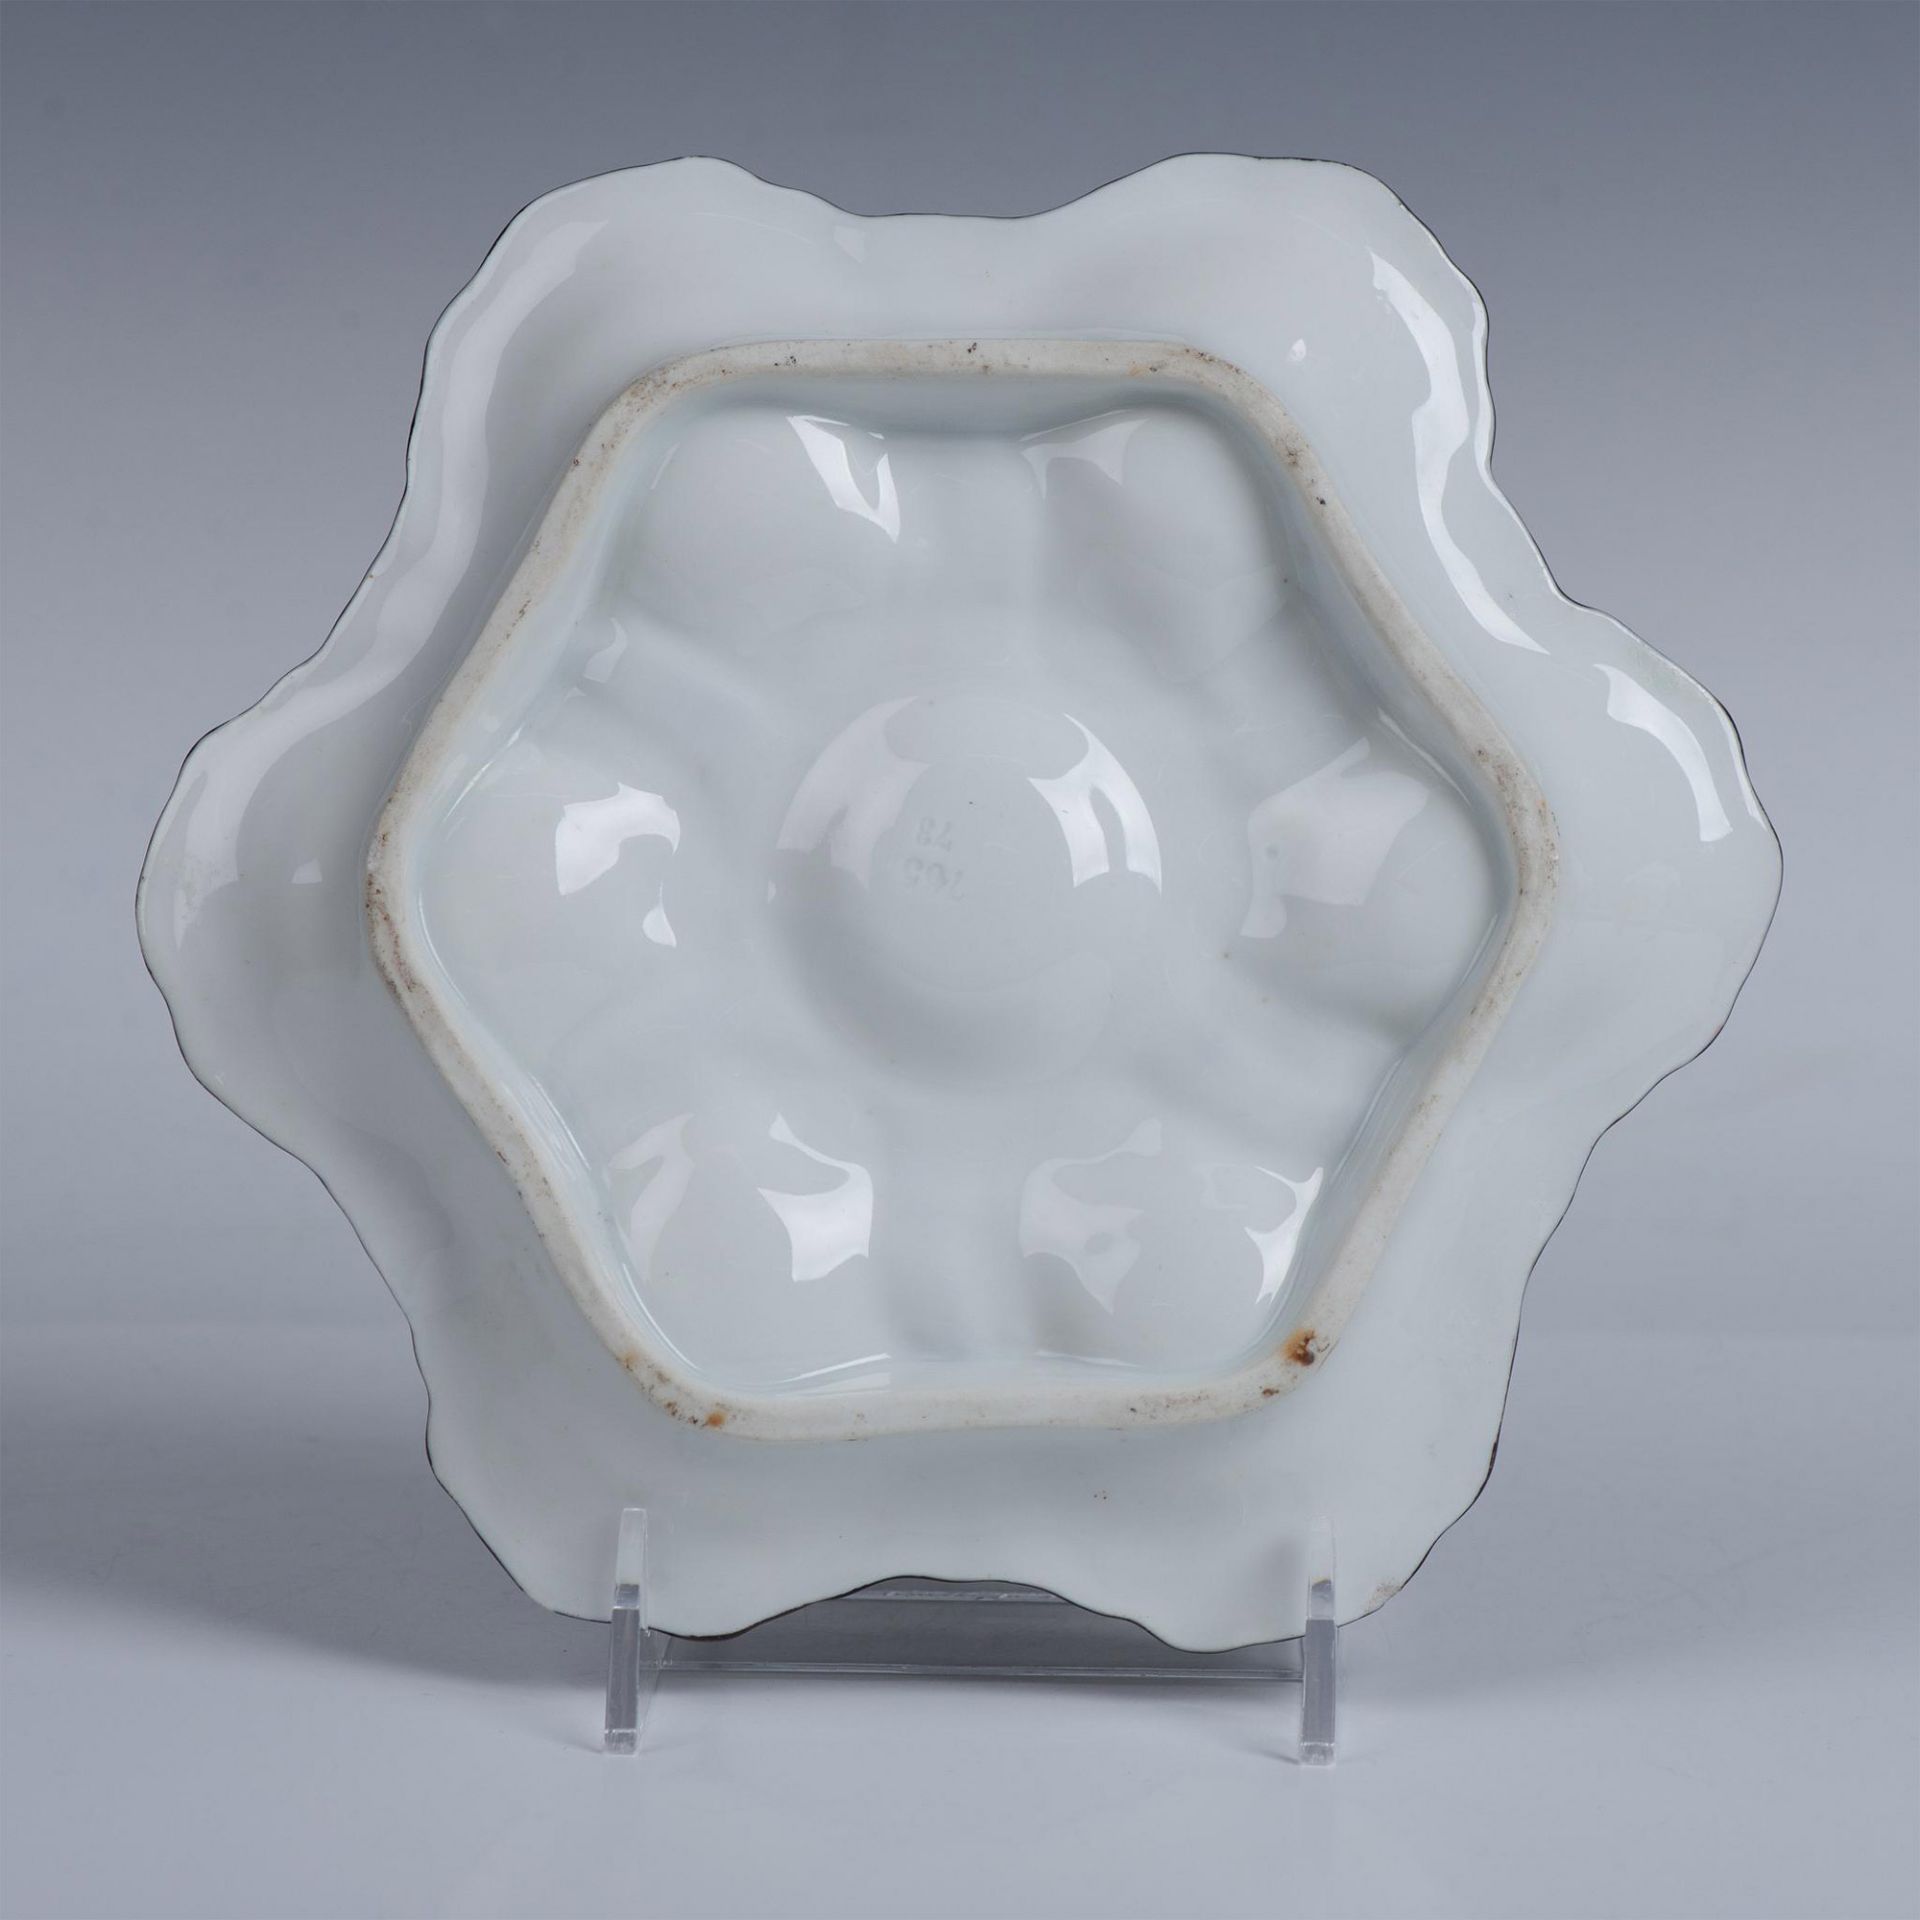 6-Well Porcelain Majolica Style Oyster Plate - Image 4 of 4